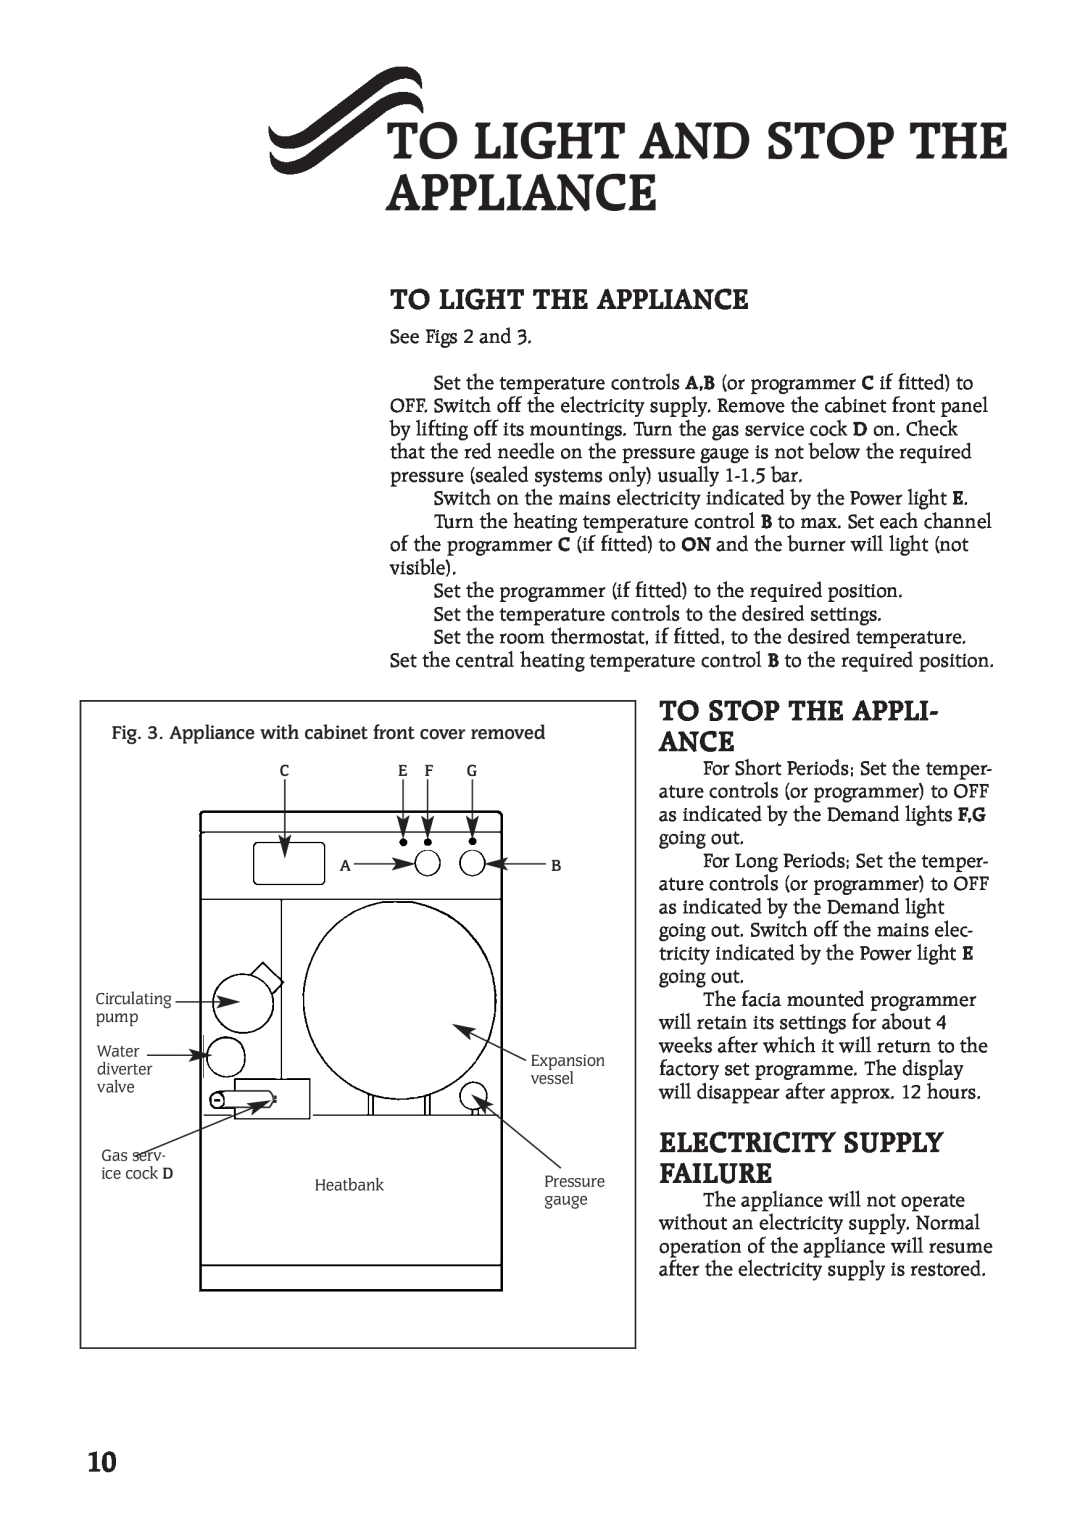 Compex Technologies 400 manual To Light And Stop The Appliance, To Light The Appliance, To Stop The Appli- Ance 